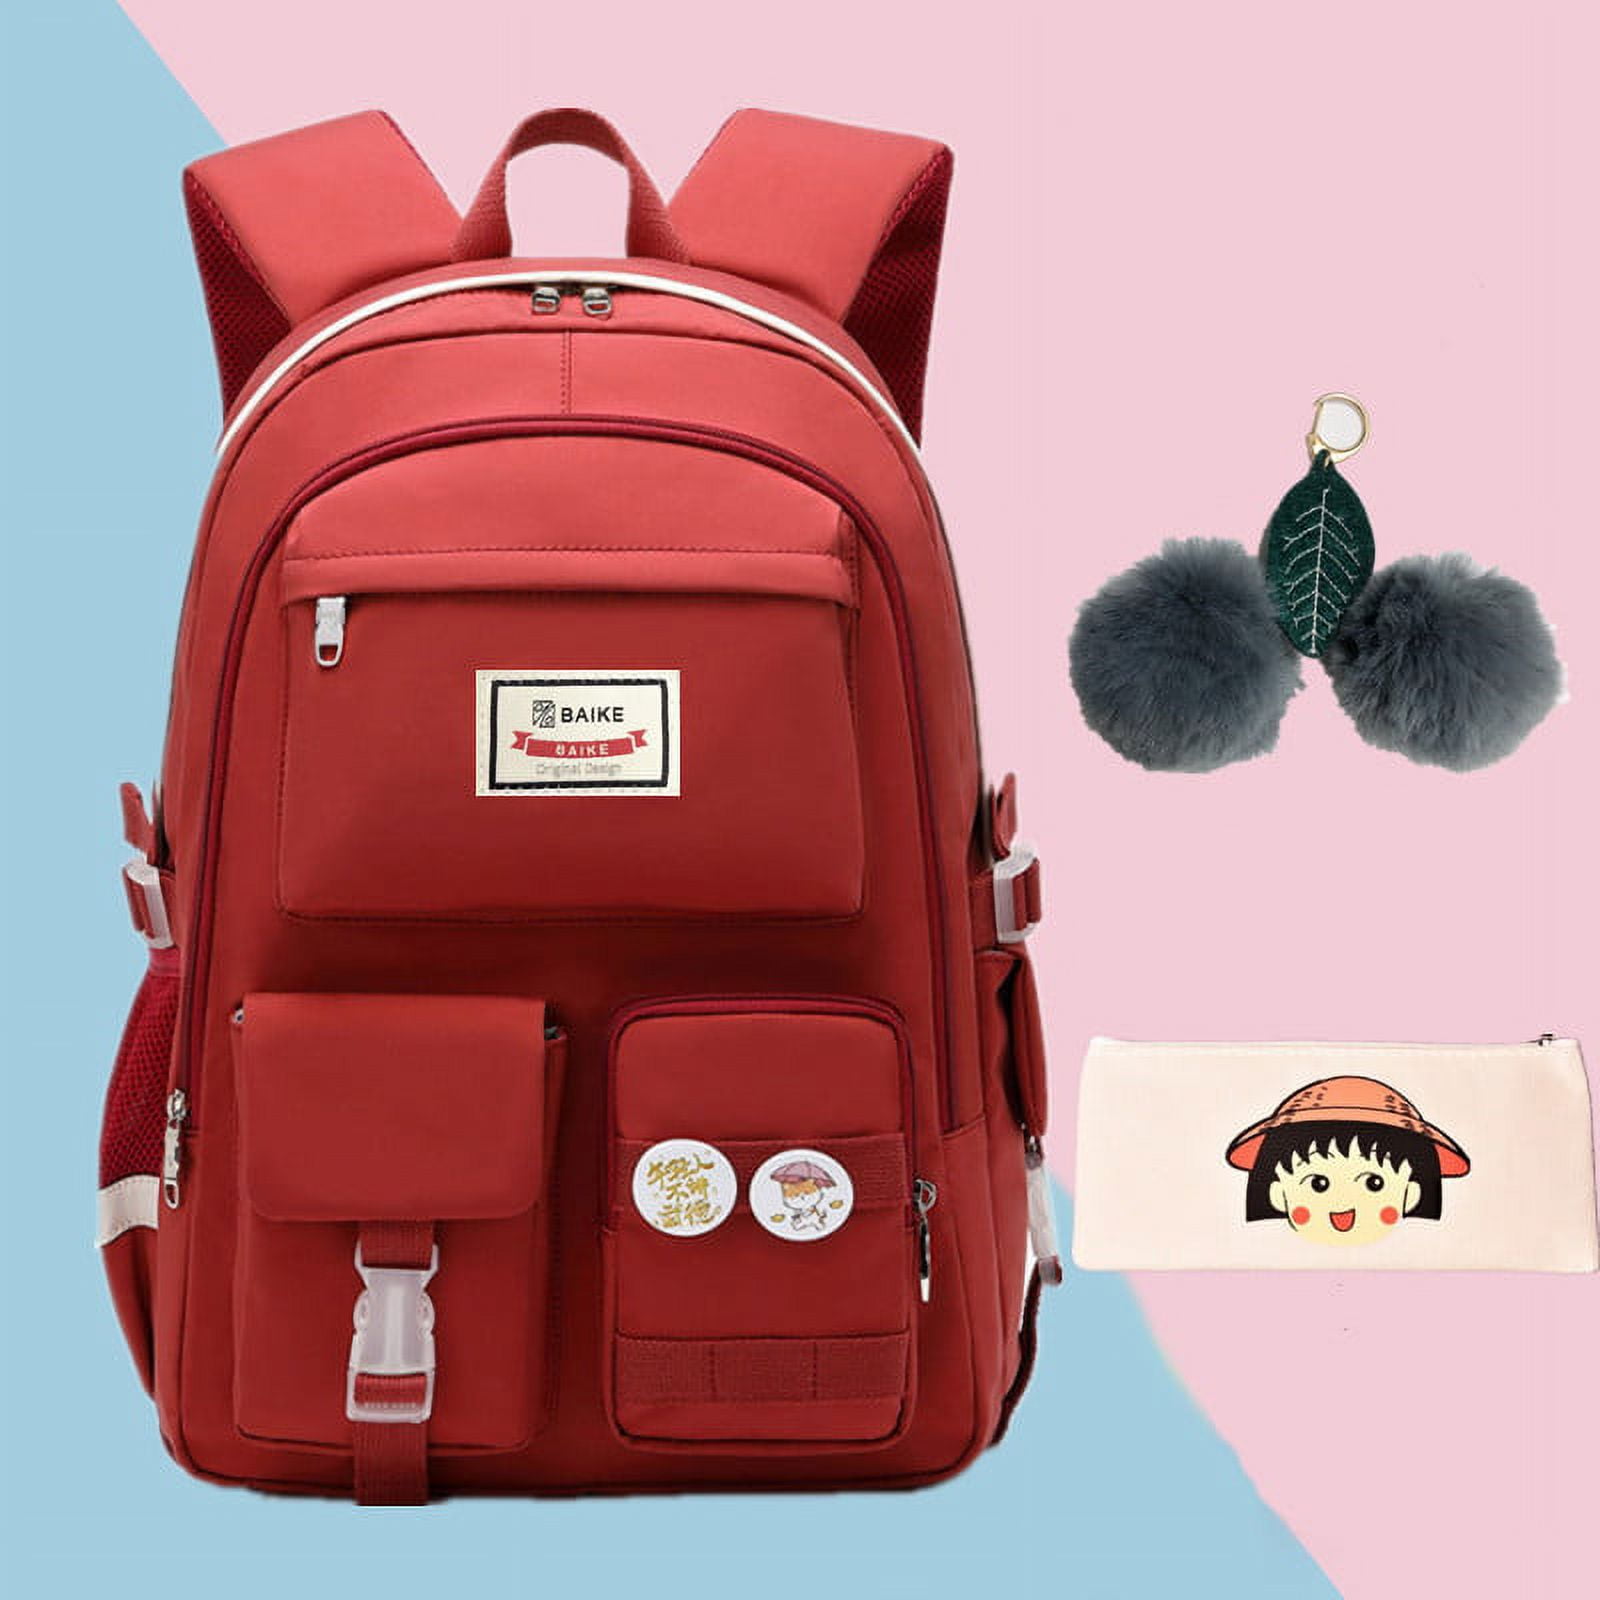 Buy Latest Backpacks: Luggage Bags, Travel Bags, College Bags